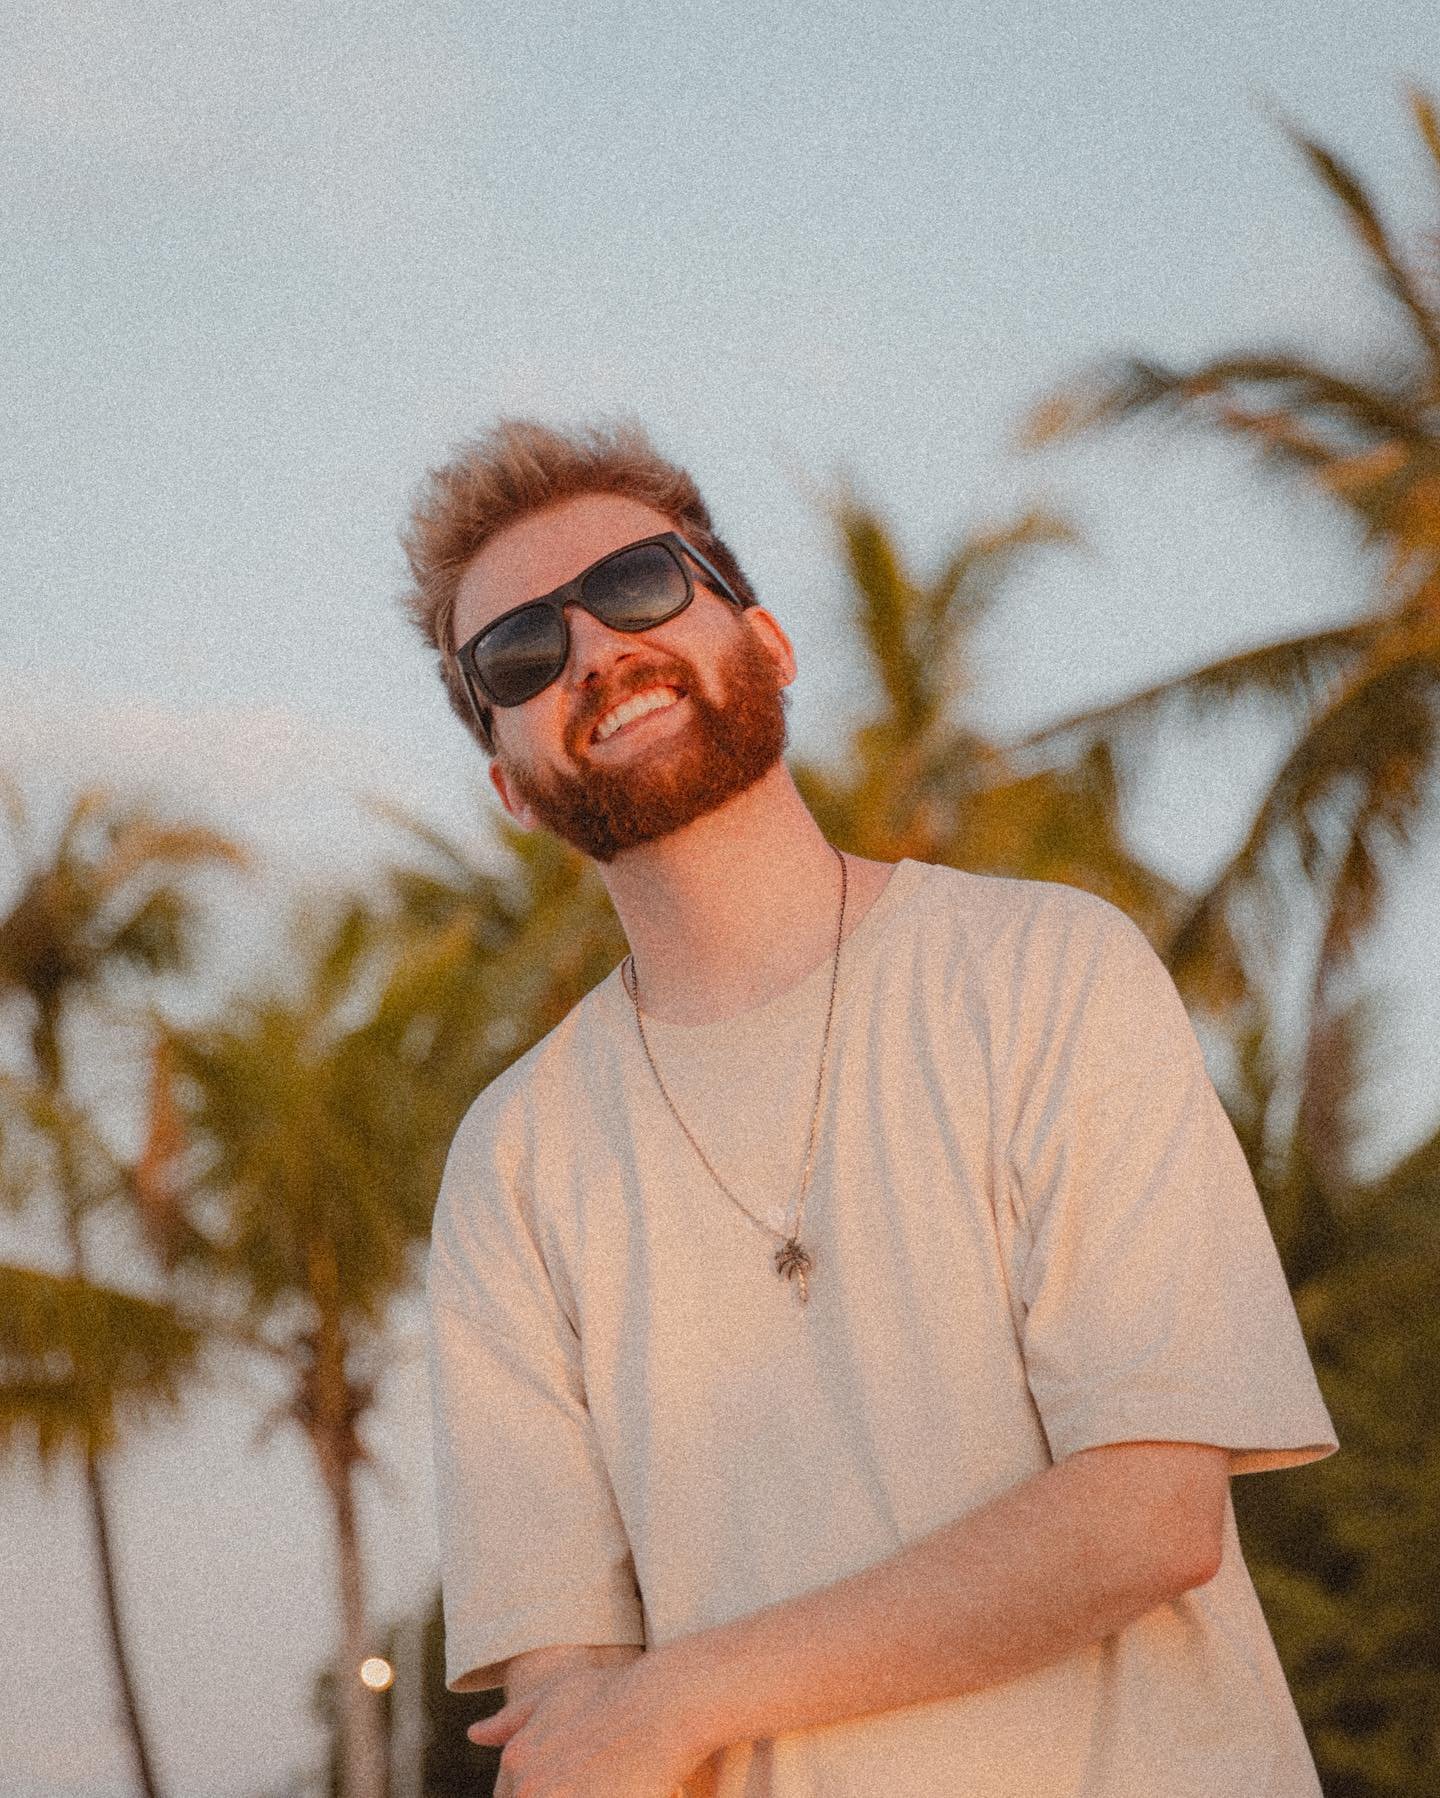 Super happy with all your amazing feedback to my new song LONELY ❤️❤️ I made the song in germany, premiered it in thailand and filmed the music video on the maldives&hellip;. wtffffff is life 🙃🤯
Stream it now everywhere and add it to your playlist 